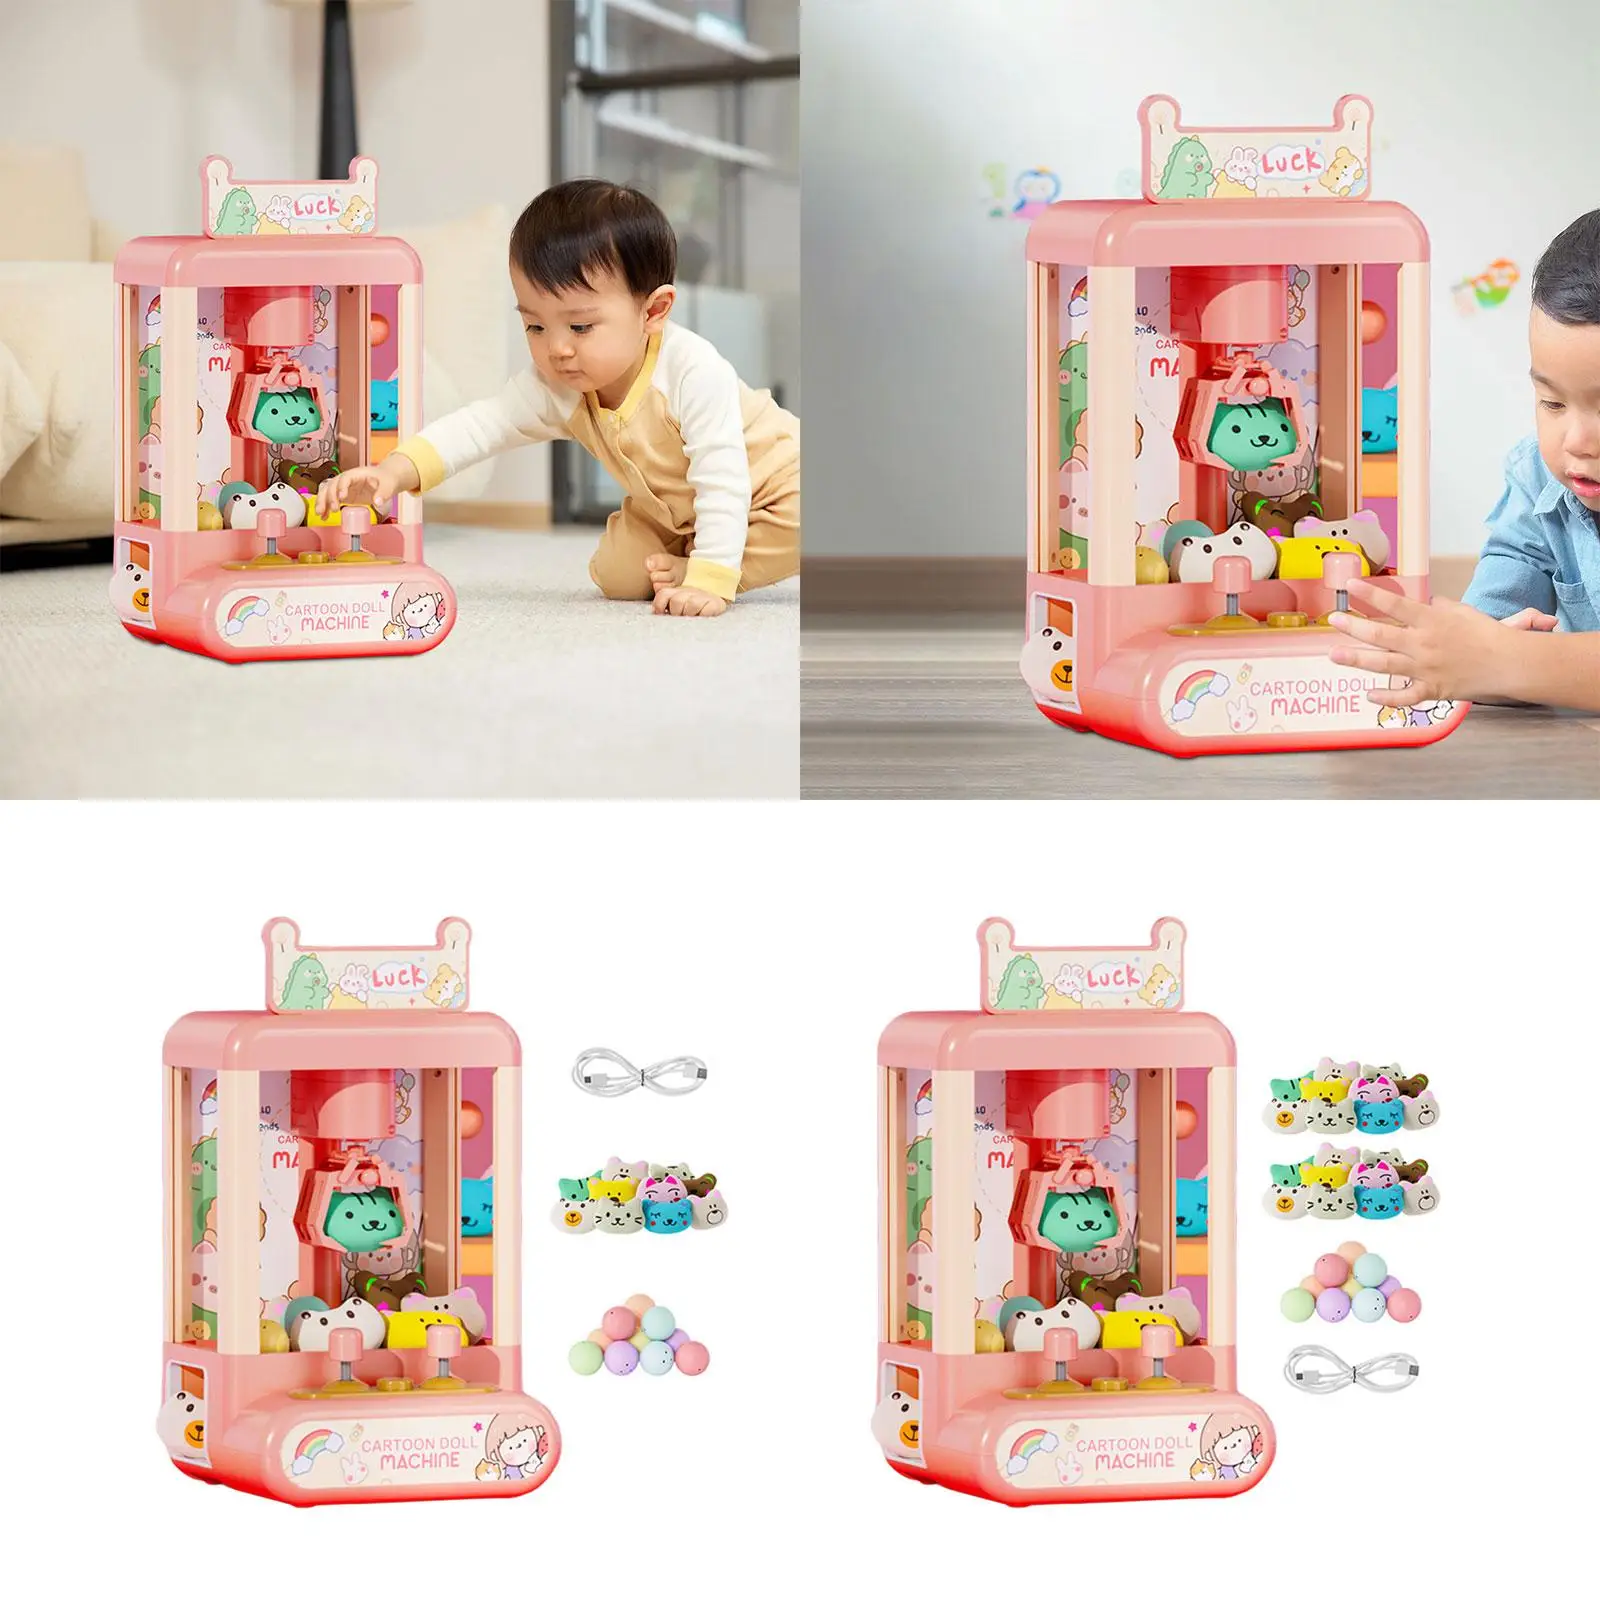 Kids Small Claw Machine Arcade Claw Games Prize Dispenser Toys Doll Machine with Sounds for Girls 6 7 8 9 Year Old Holiday Gifts